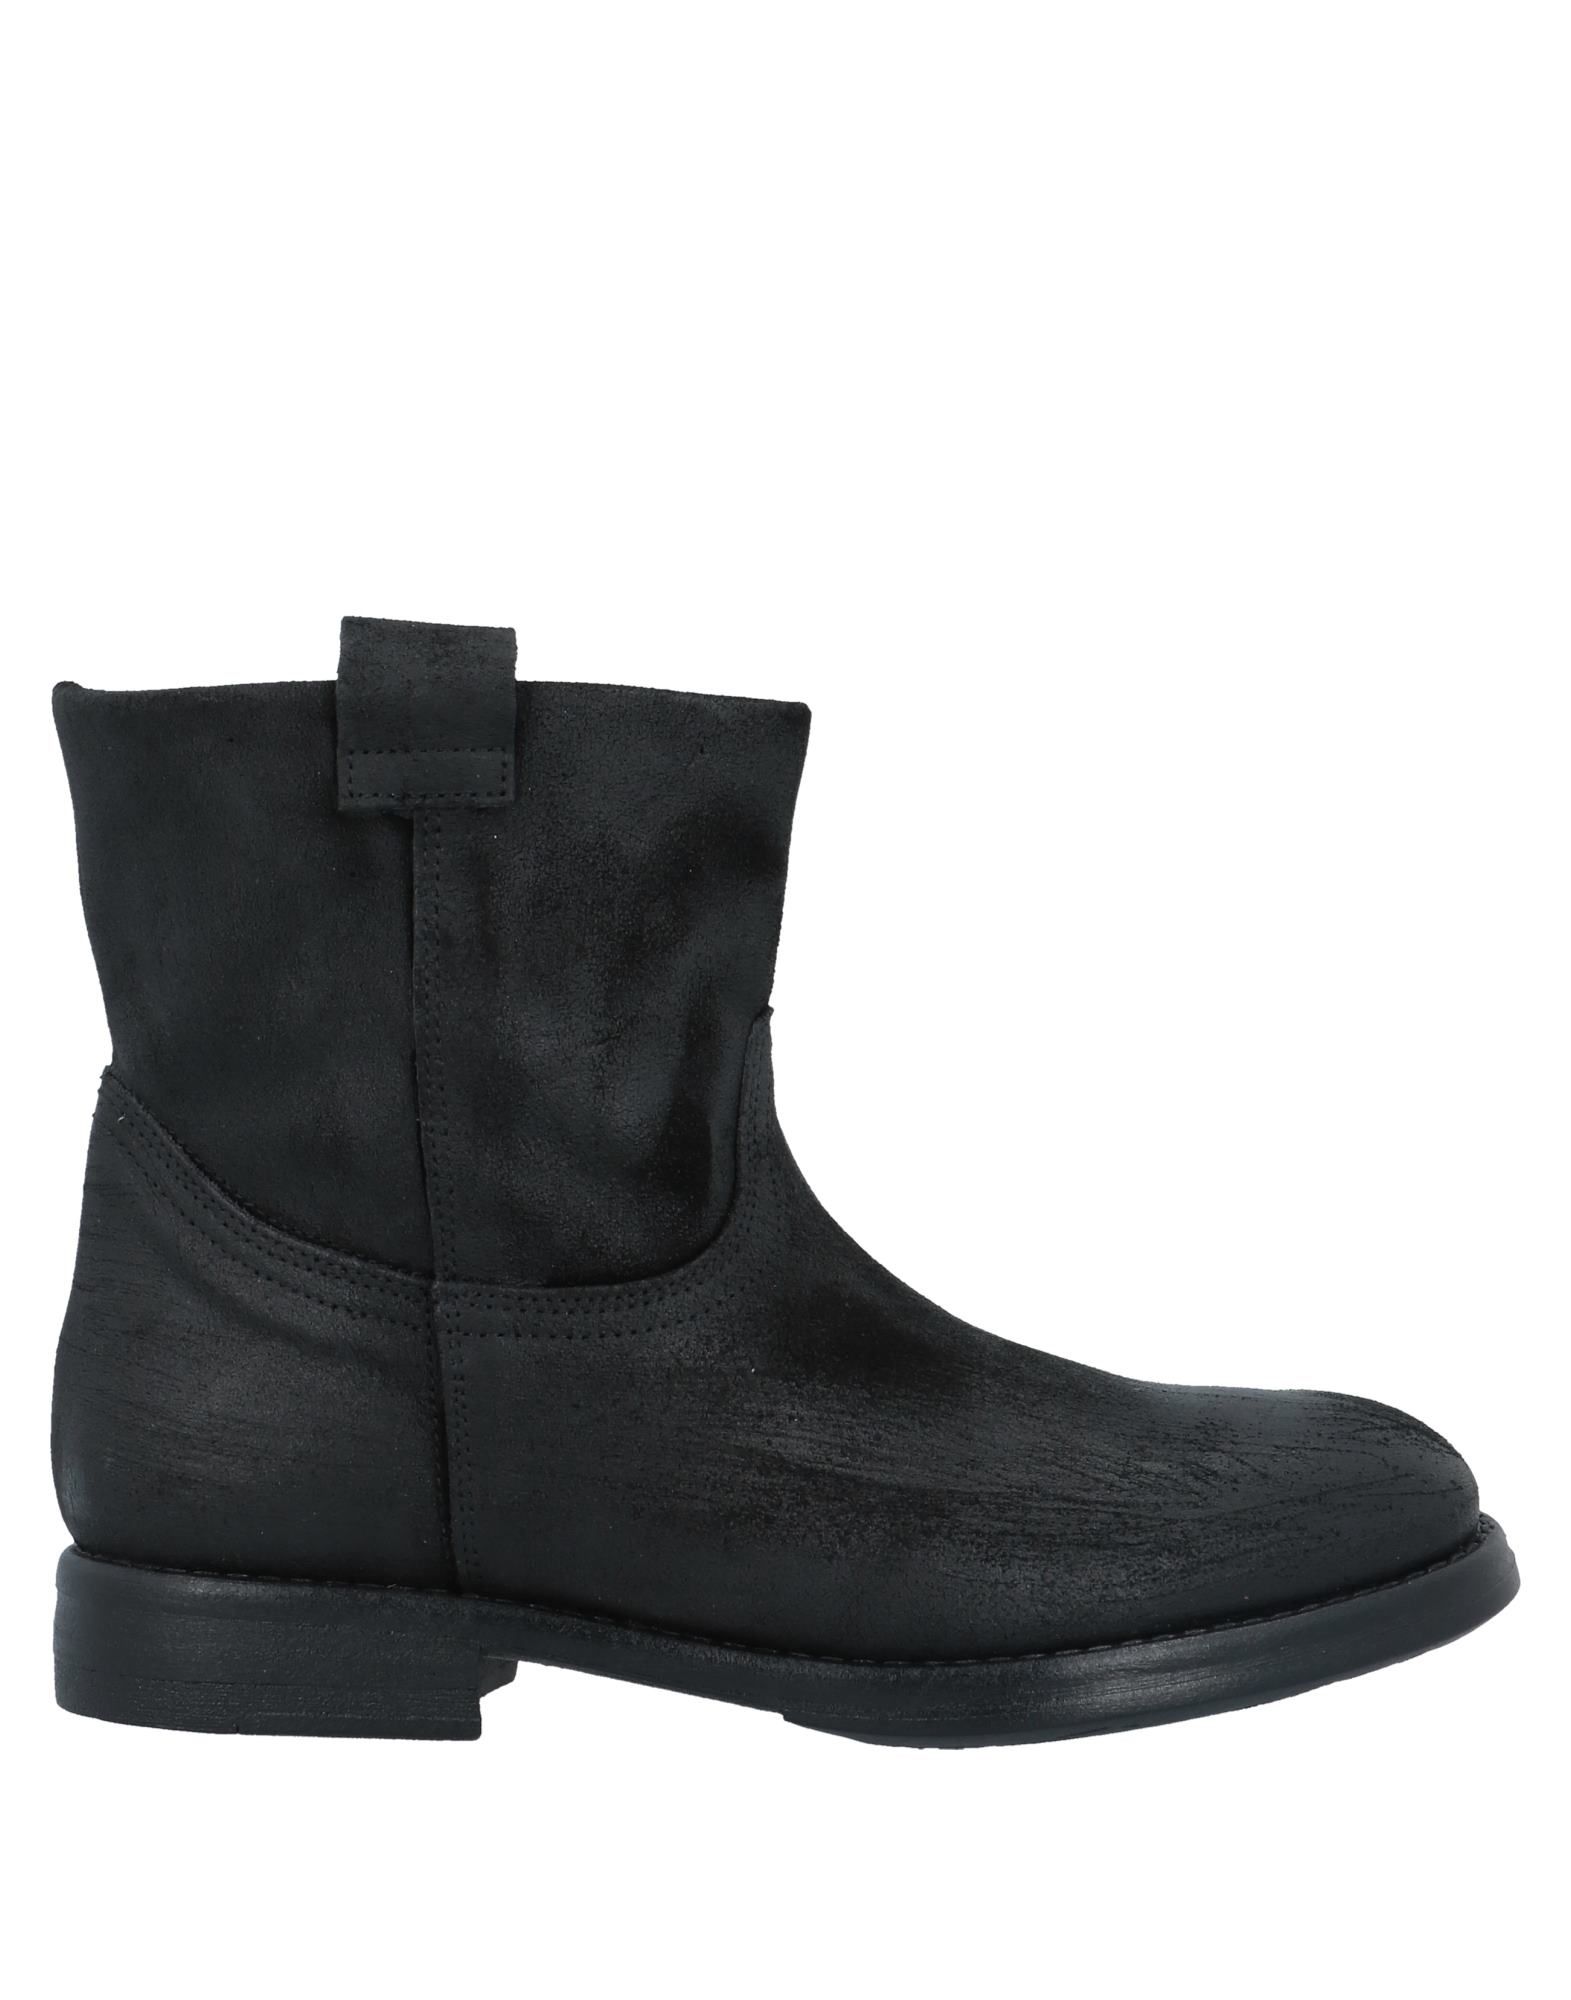 Creative Ankle Boots In Black